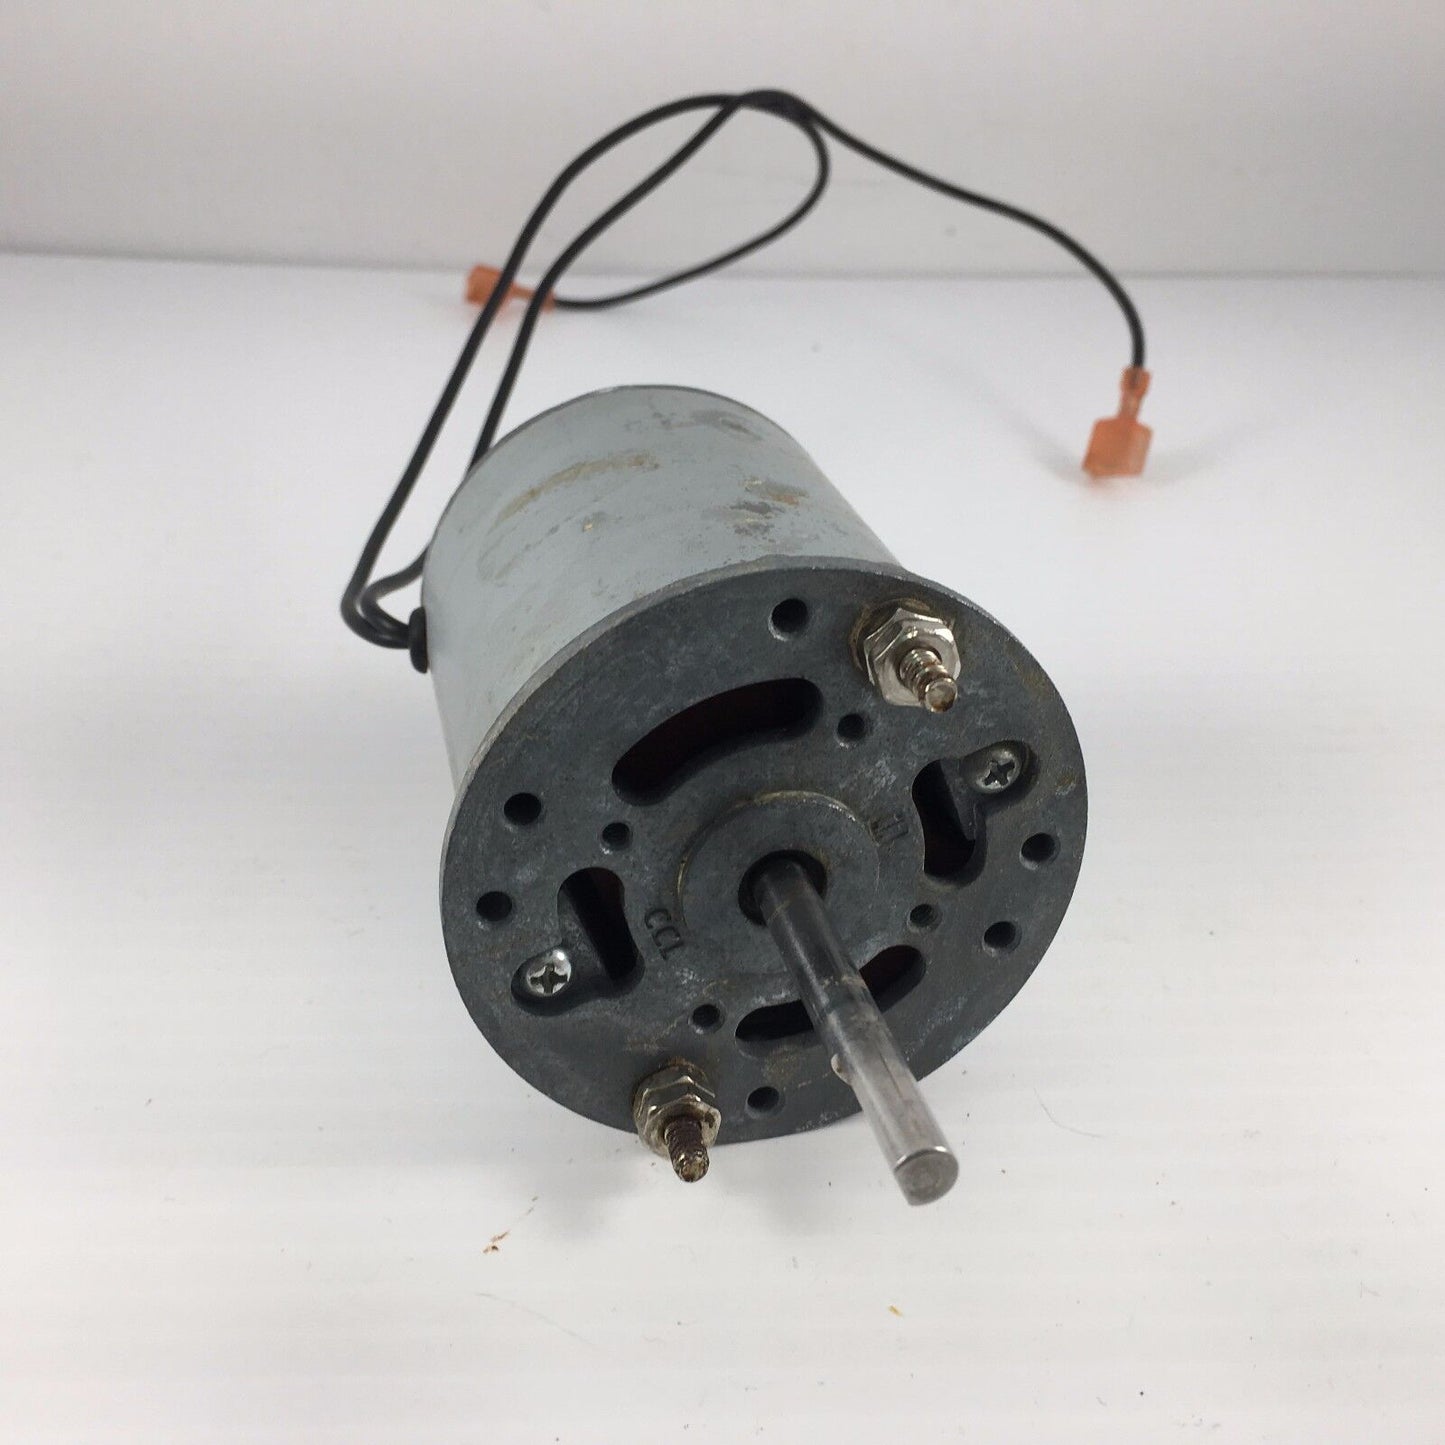 Bunn Whipper Motor, Replaces 28428.1000, UD-15L-1005, E71778